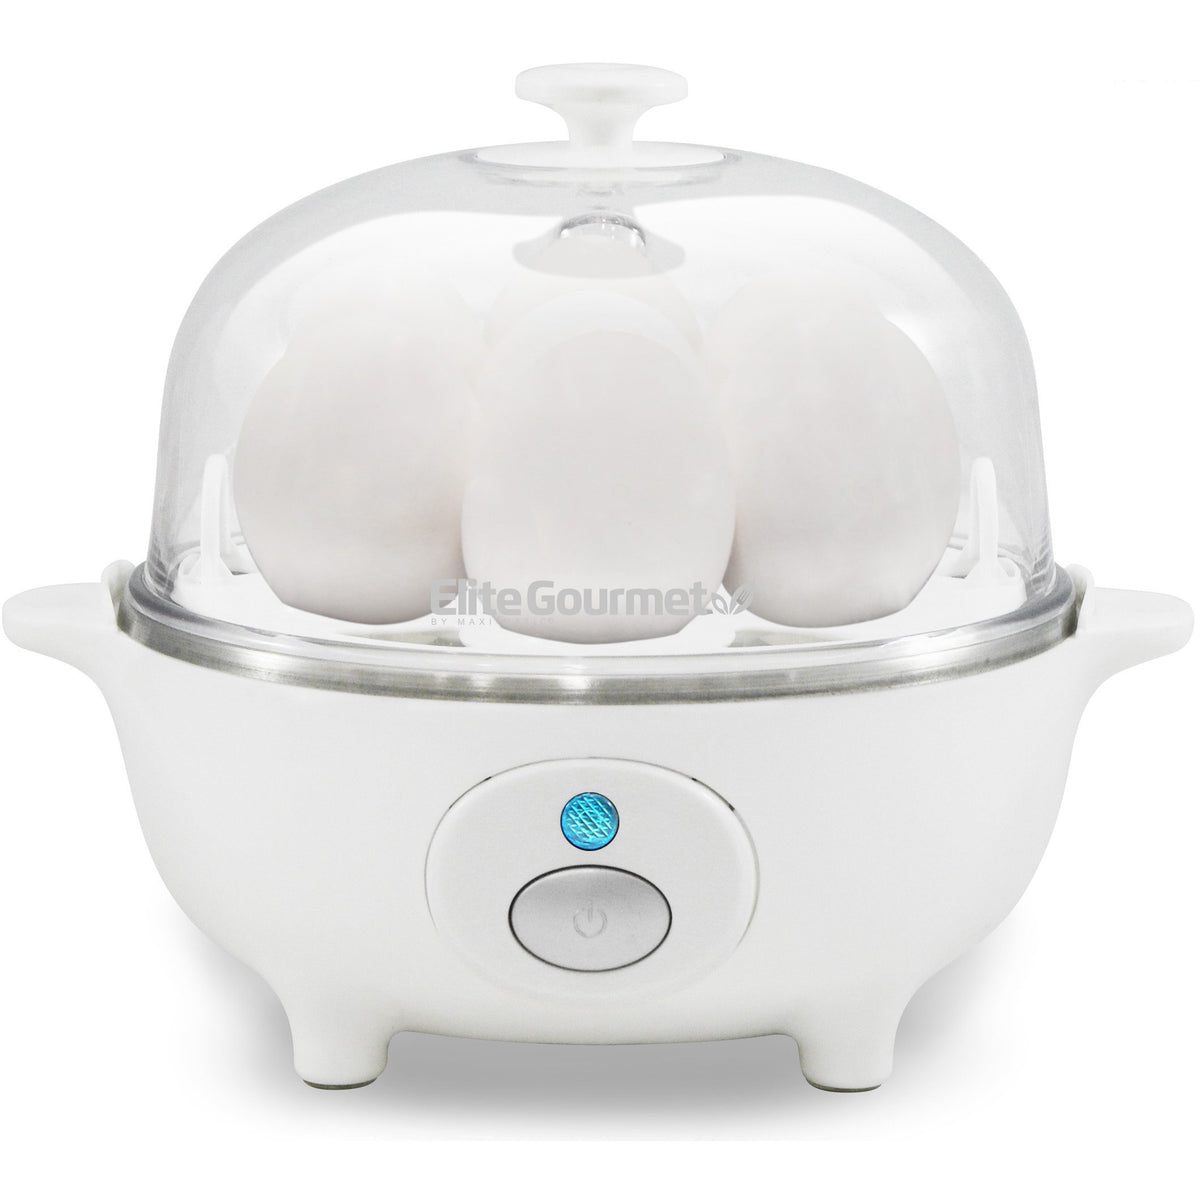 Elite Gourmet EGC648 Easy Electric Poacher, Omelet Eggs & Soft, Medium, Hard-Boiled Egg Boiler Cooker with Auto Shut-Off and Buzzer, Measuring Cup